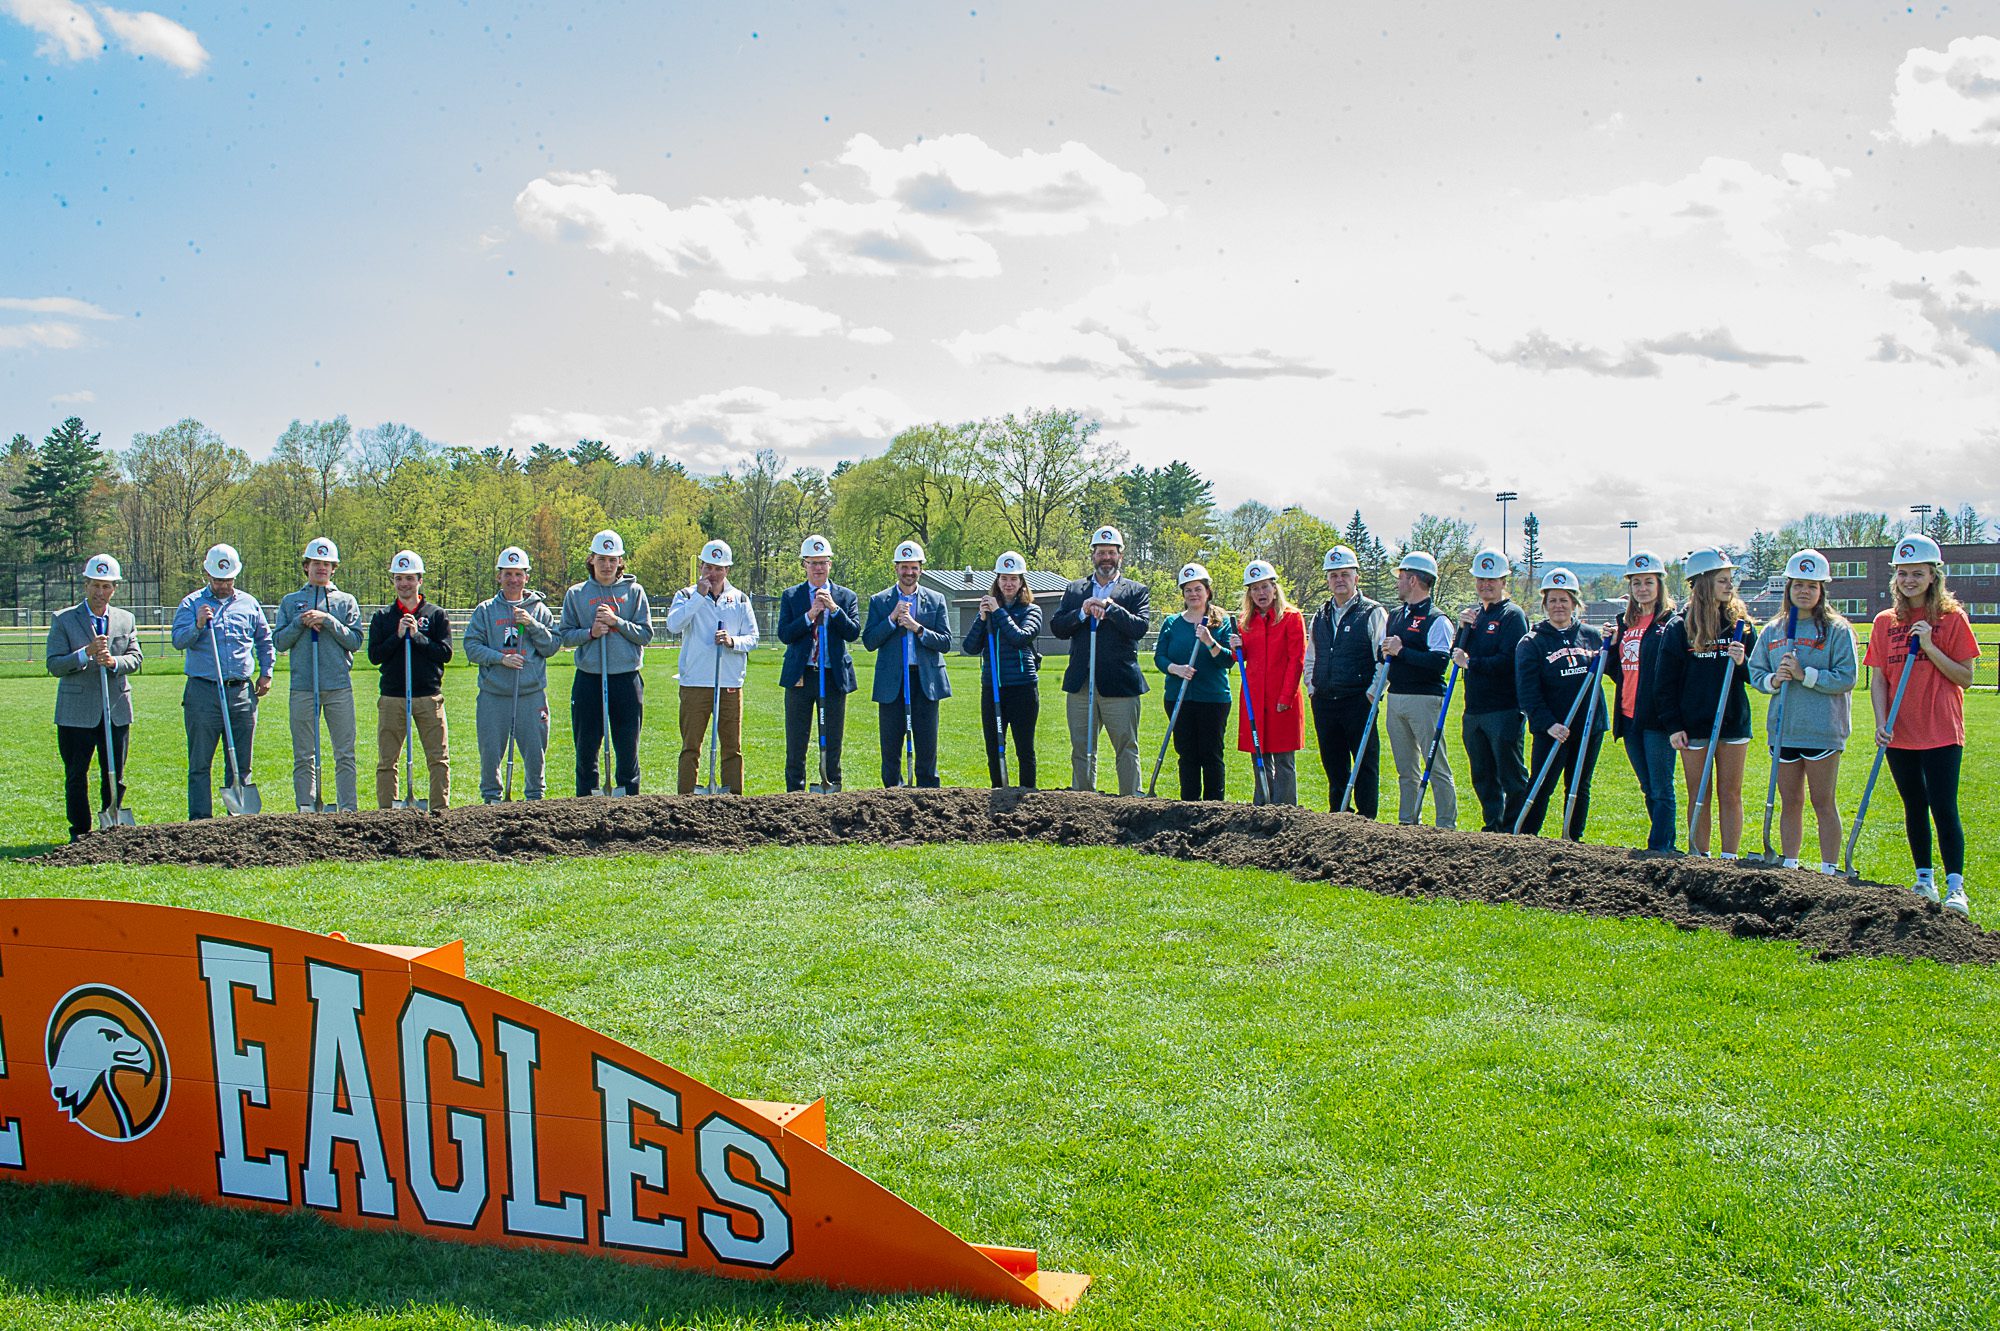 Officials had a ground breaking ceremony for the new artificial turf field at Bethlehem High School.